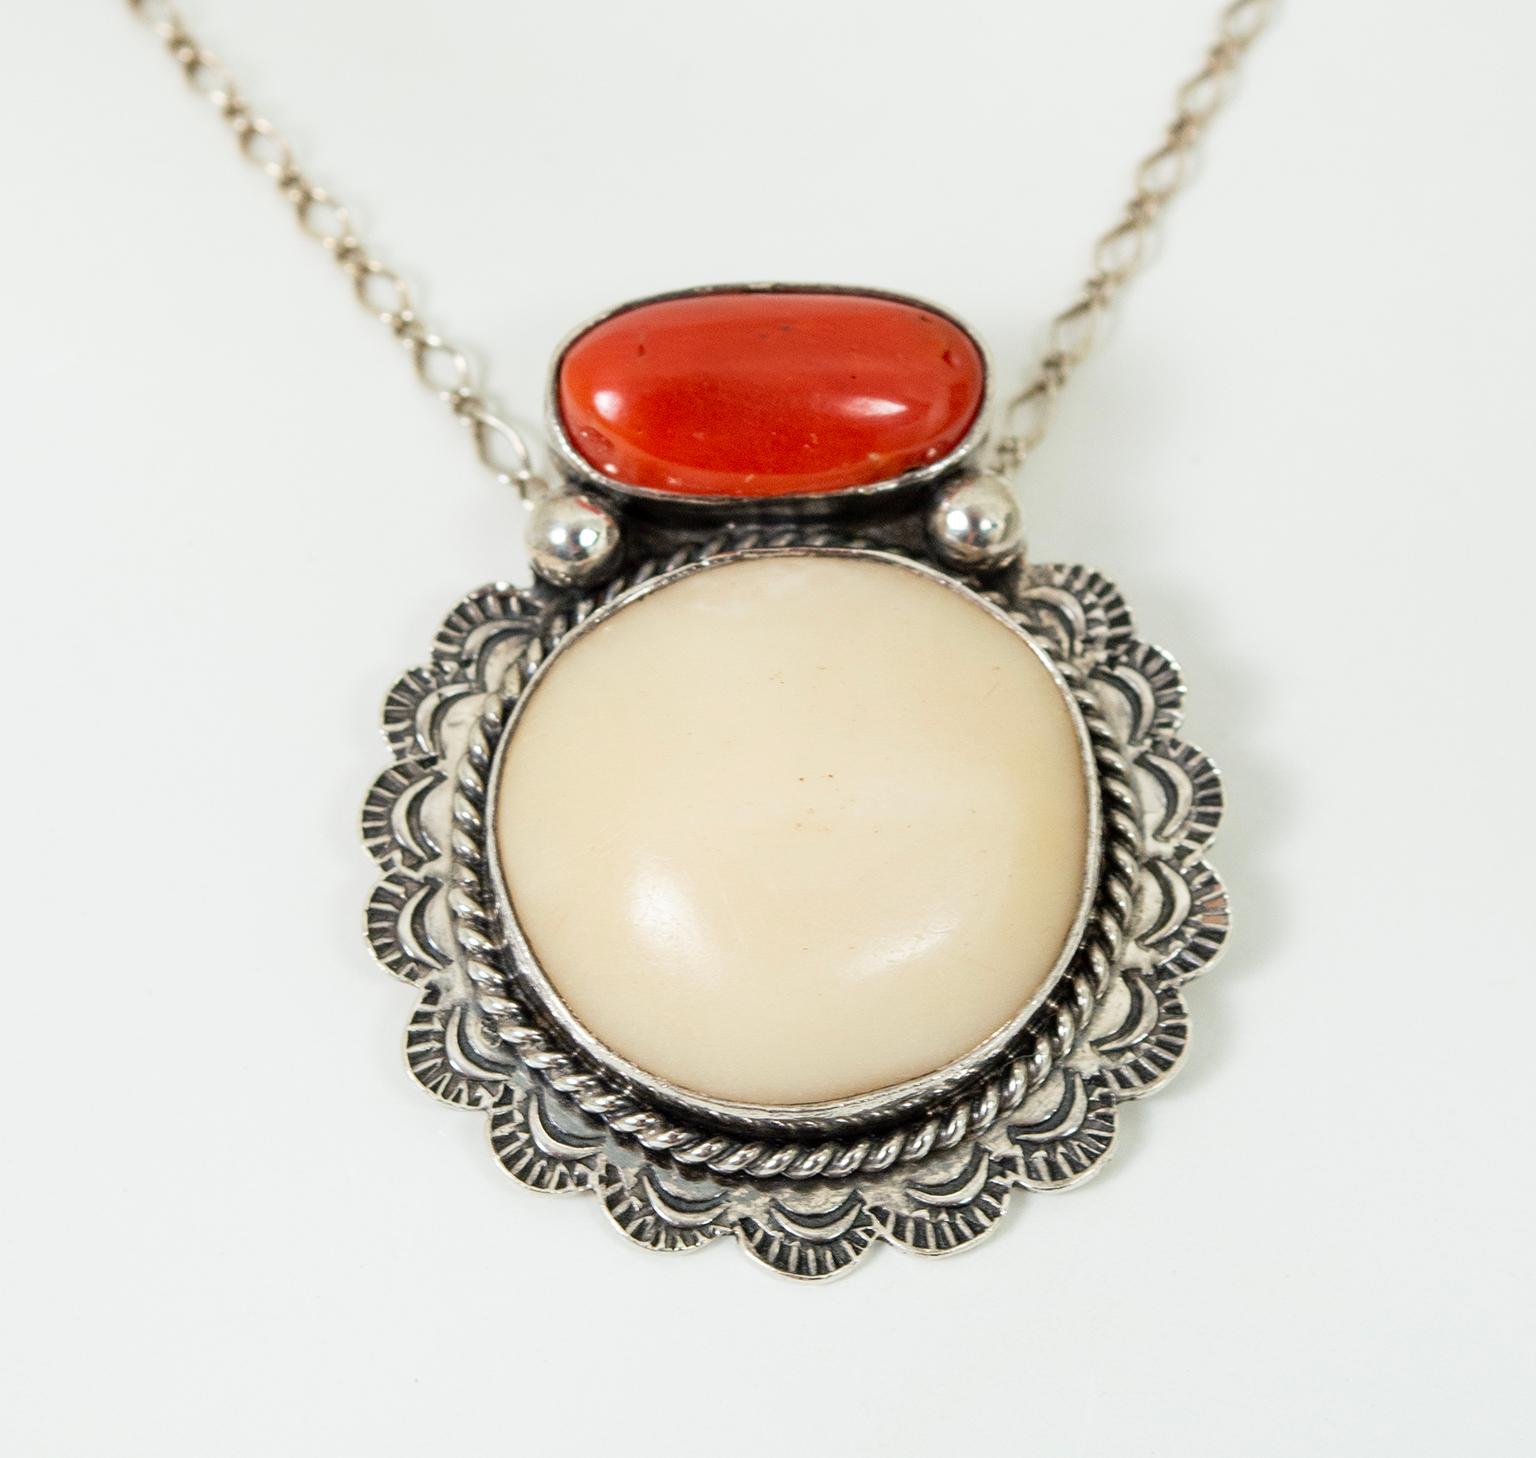 Anglo-Indian Signed Joan Slifka Navajo-Style Sterling Coral, Bone Pendant Necklace -16”, 1997 For Sale